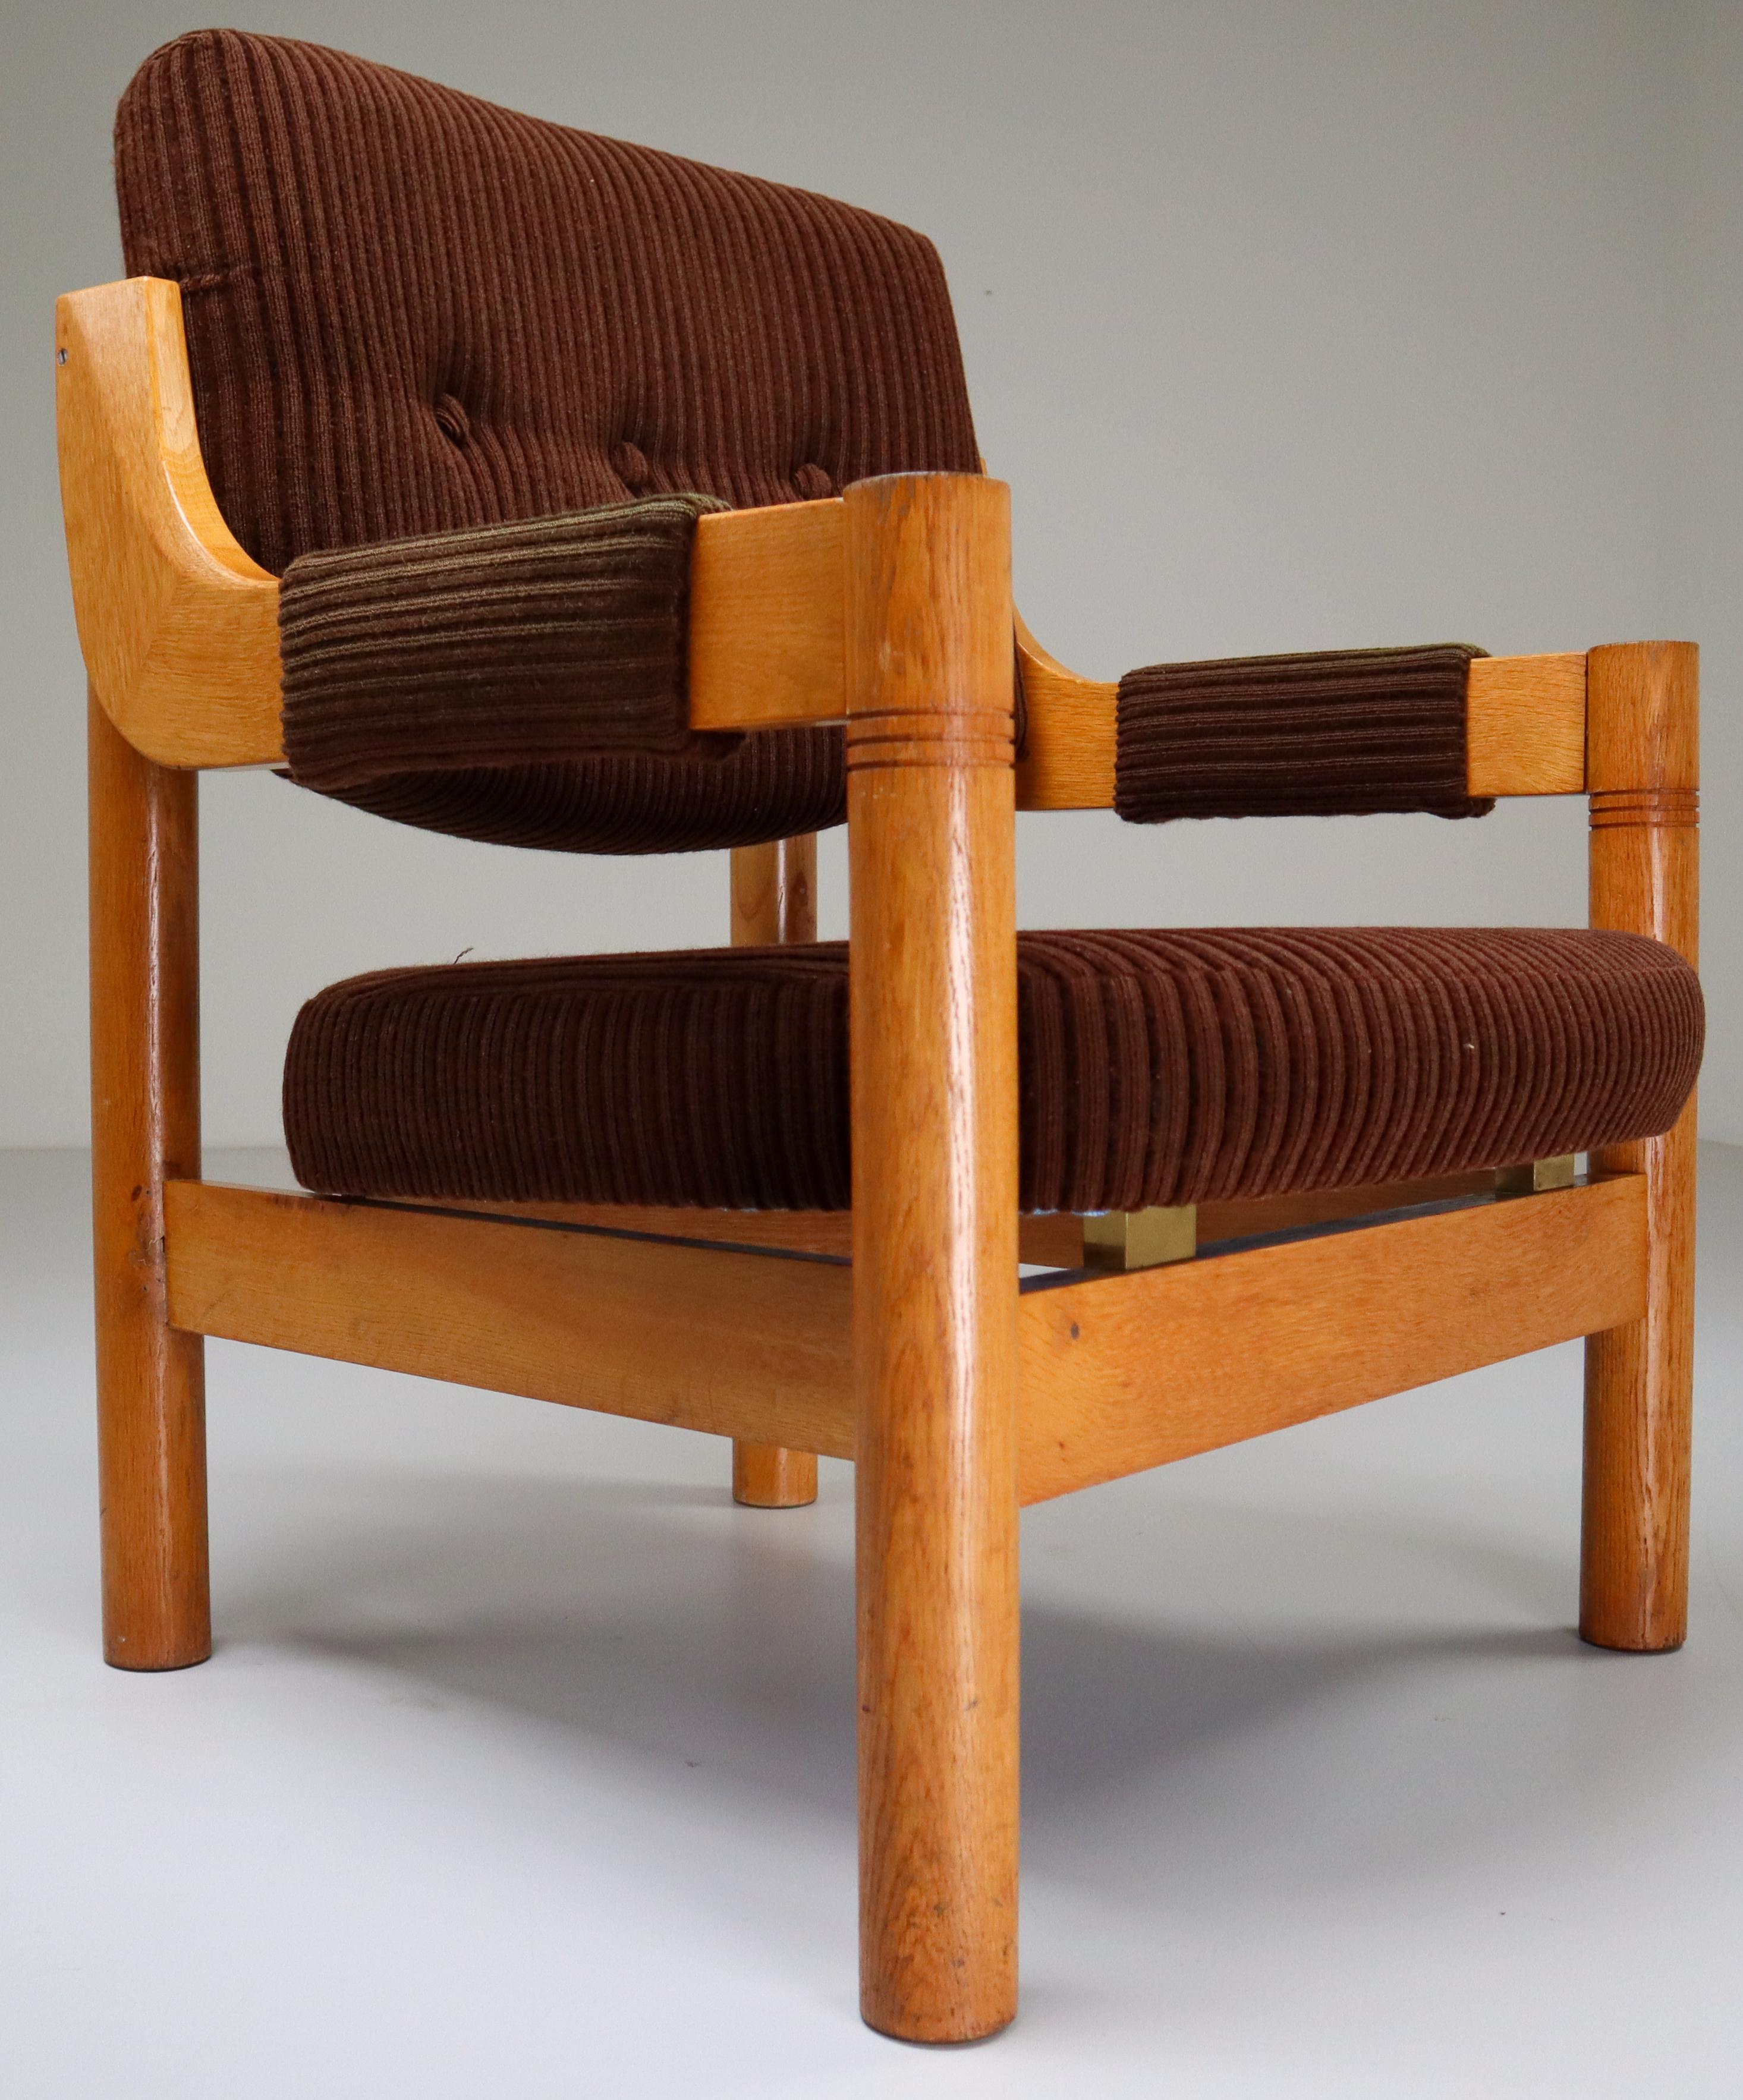 Armchairs in patinated solid oak and original Fabric from the Netherlands, 1960s. The grain of the wood is nicely visible, especially on the wide solid armrests. These armchairs would make an eye-catching addition to any interior such as living